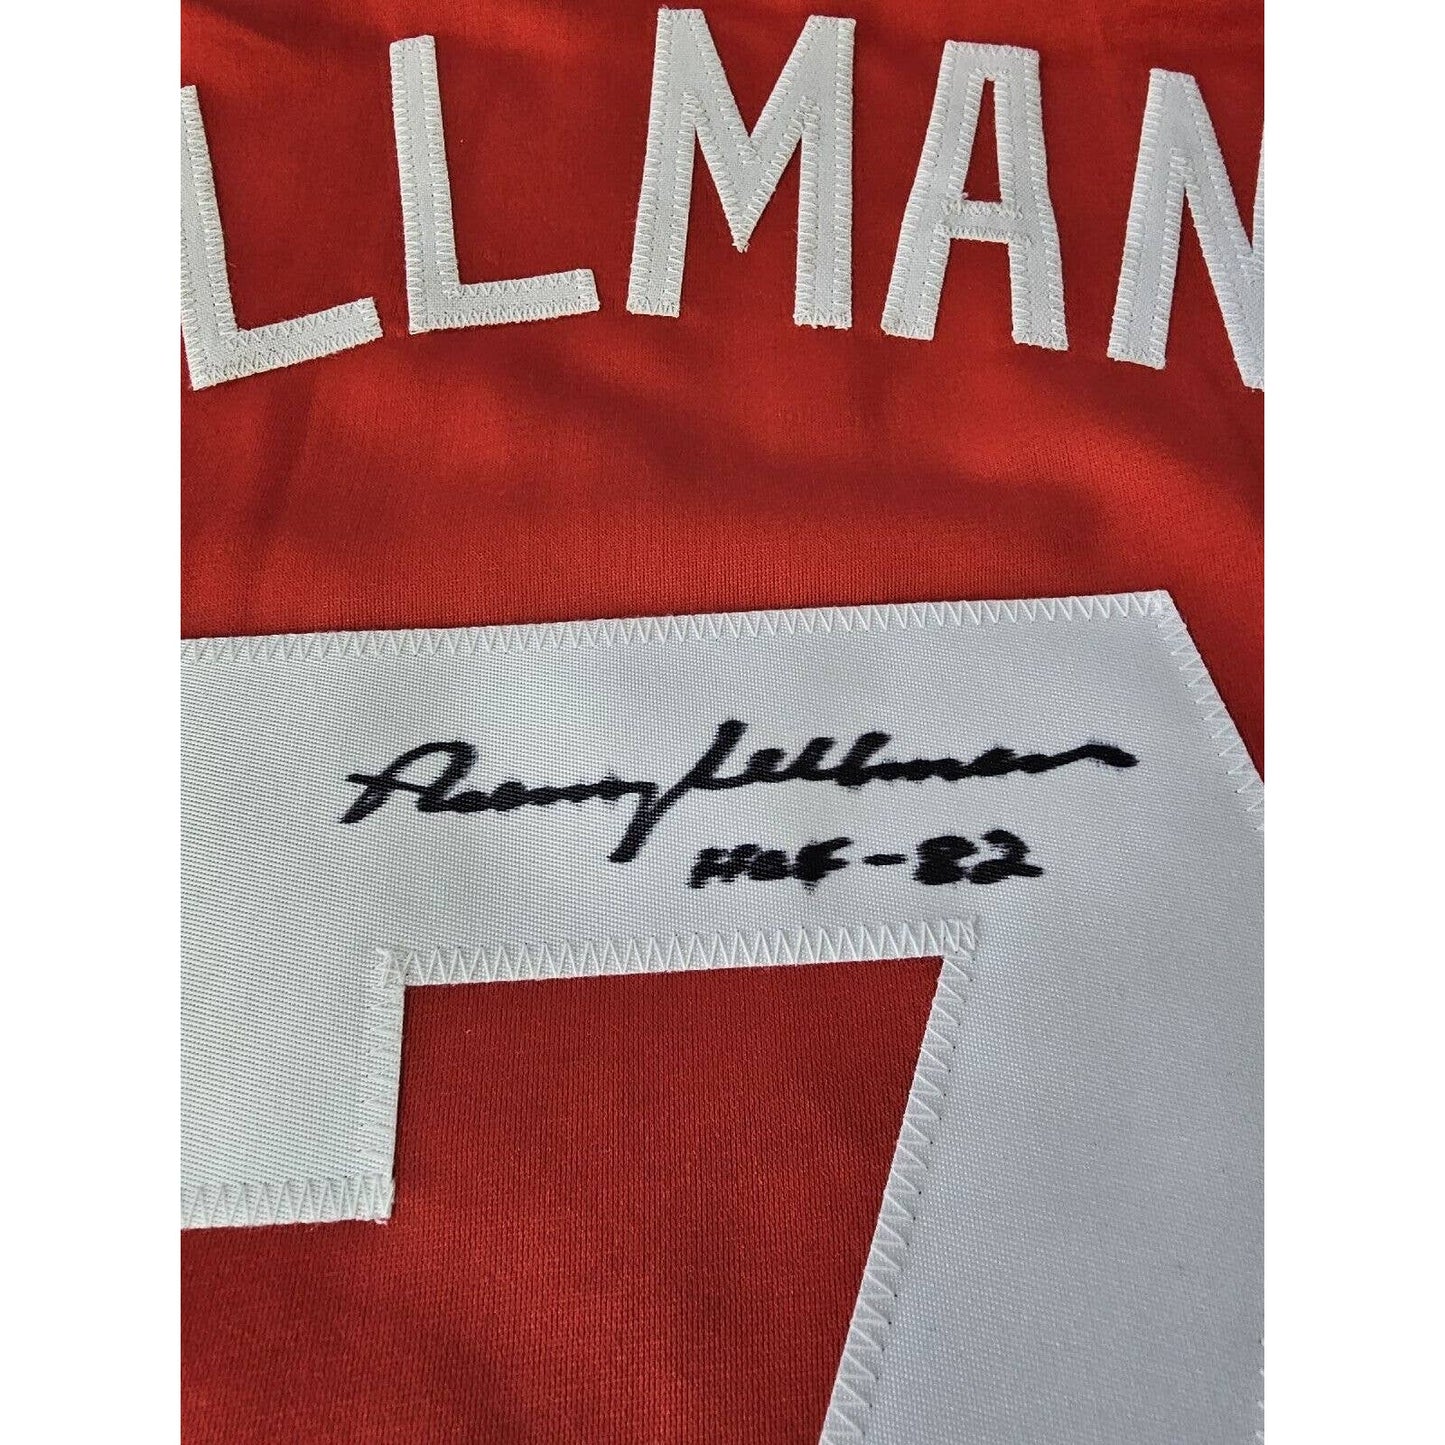 Norm Ullman Autographed/Signed Jersey Beckett COA Detroit Red Wings HOF